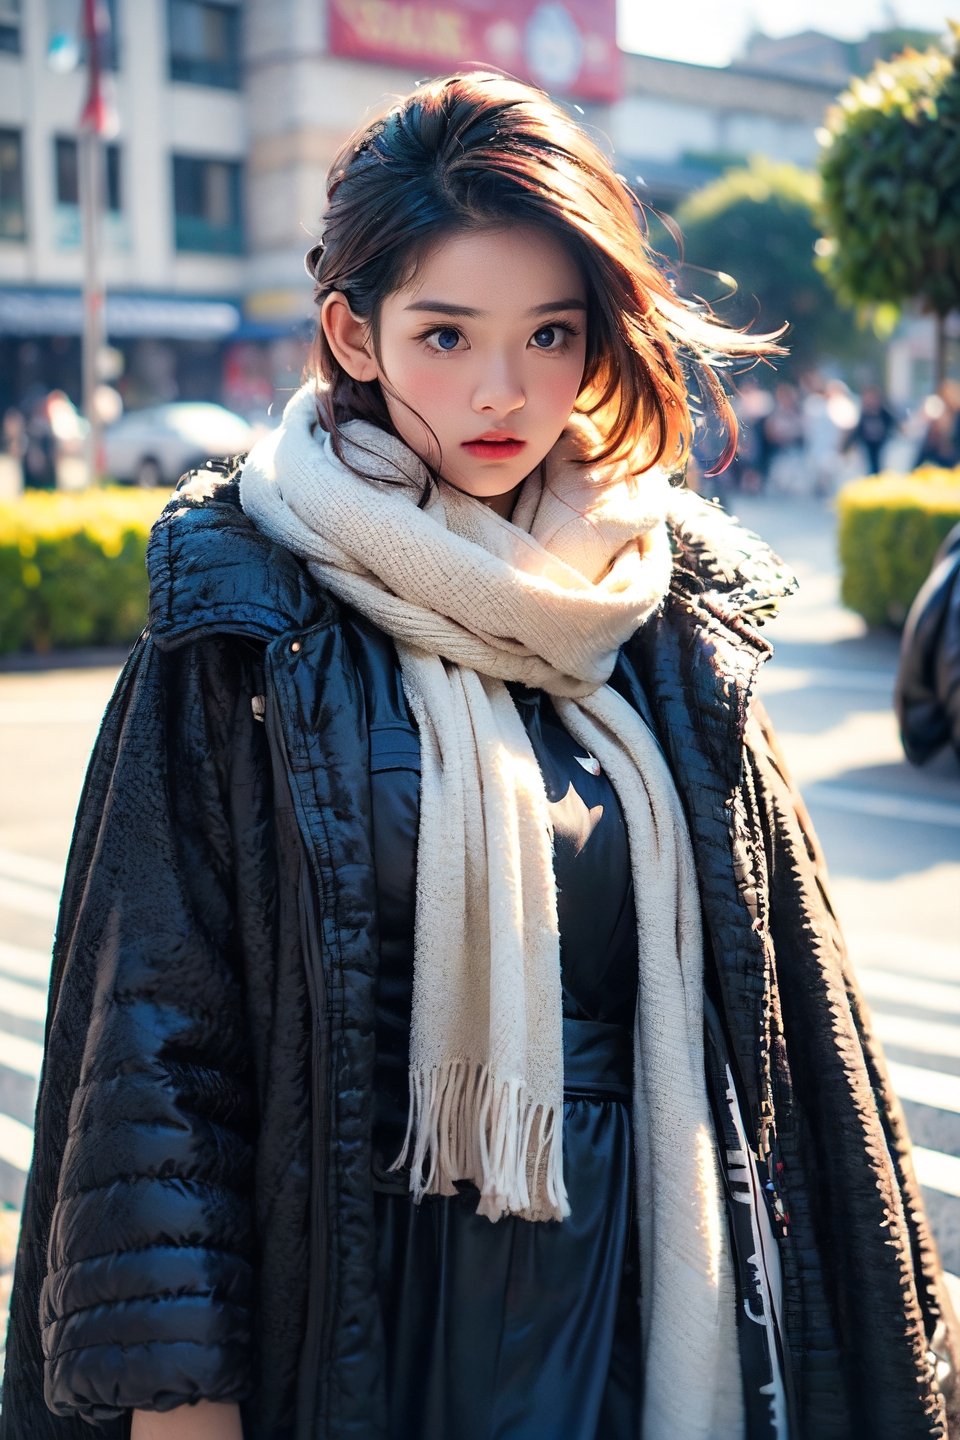 low quality photo, film grain, blur, A woman wrapped in a cream-colored scarf, with a black coat draped over her shoulders. Her gaze is pensive, her black hair tousled by the wind, bare face, against an urban backdrop, sunlit face,girlvn